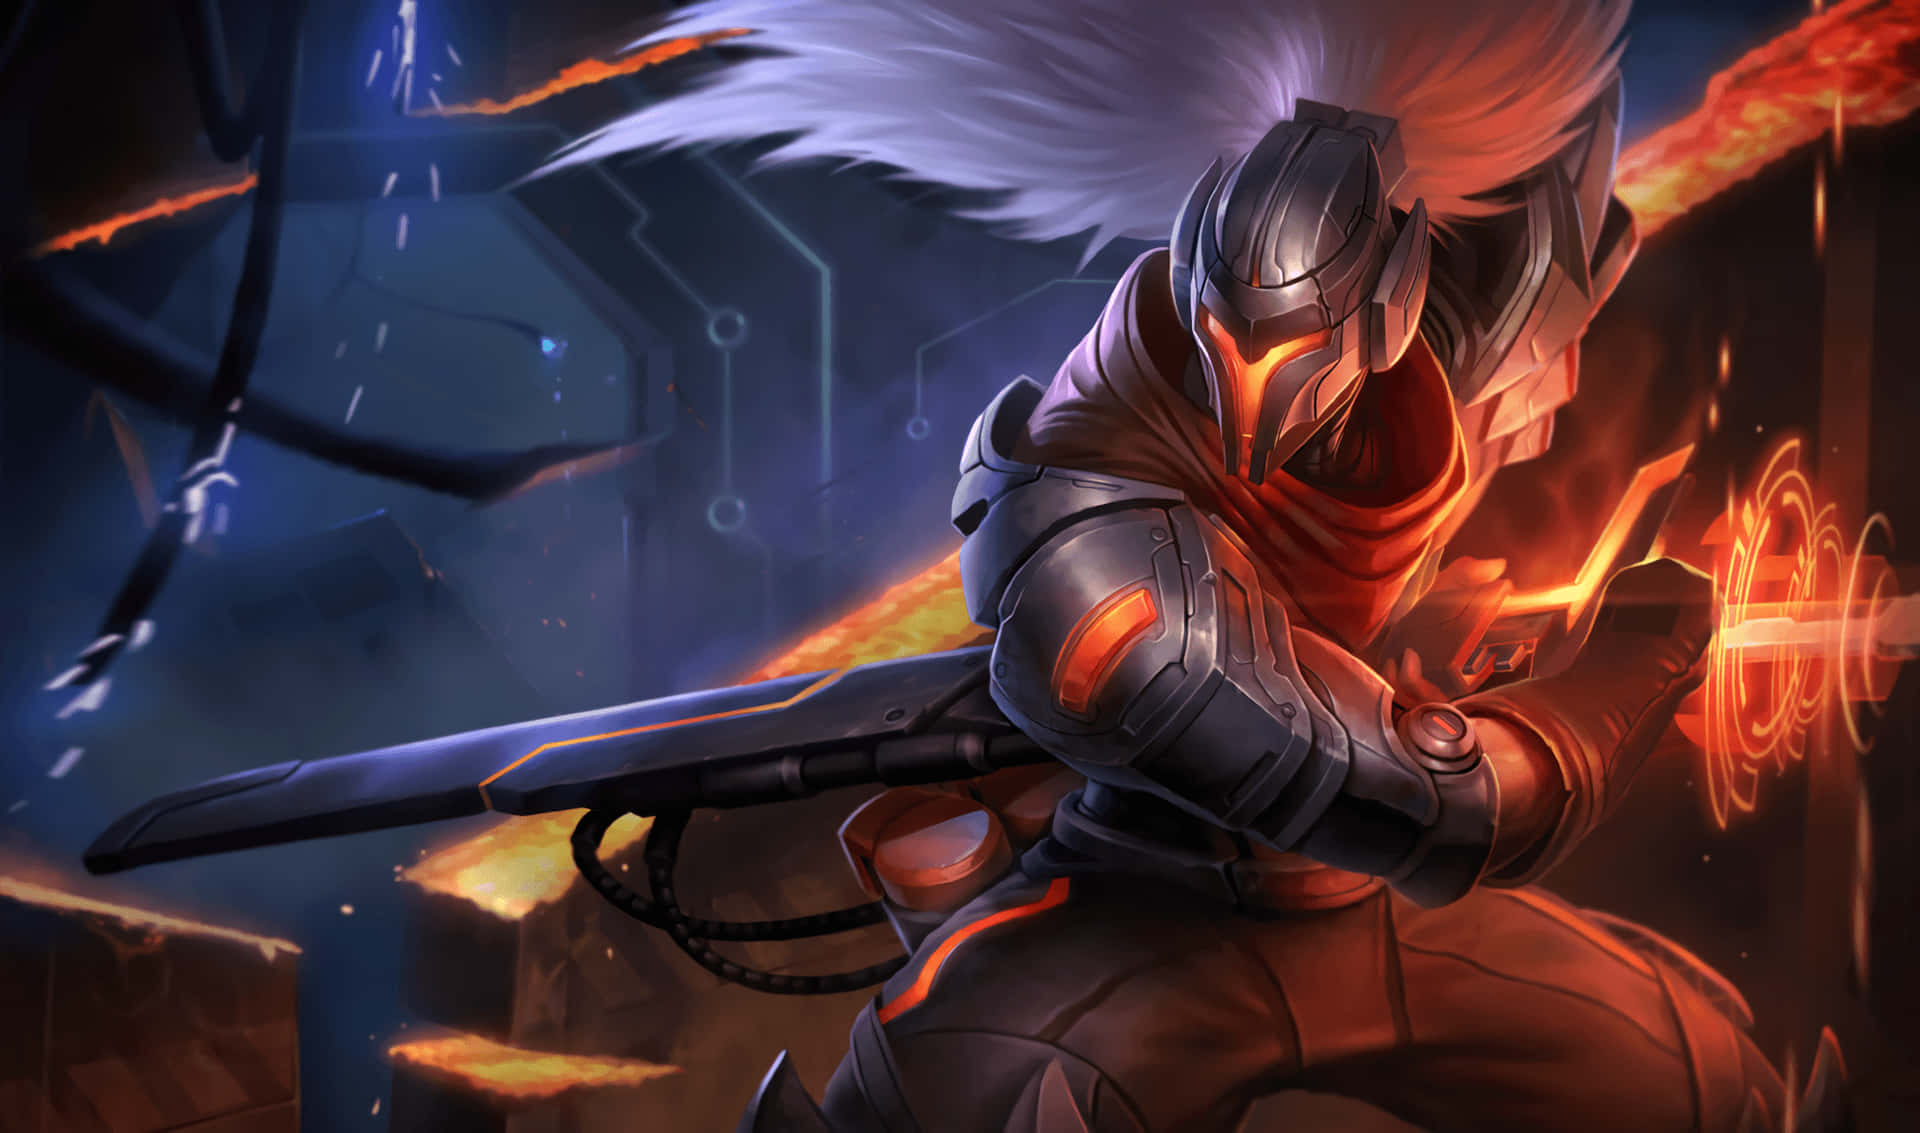 Best “League of Legends” wallpapers for your PC from Wallpaper Engine!